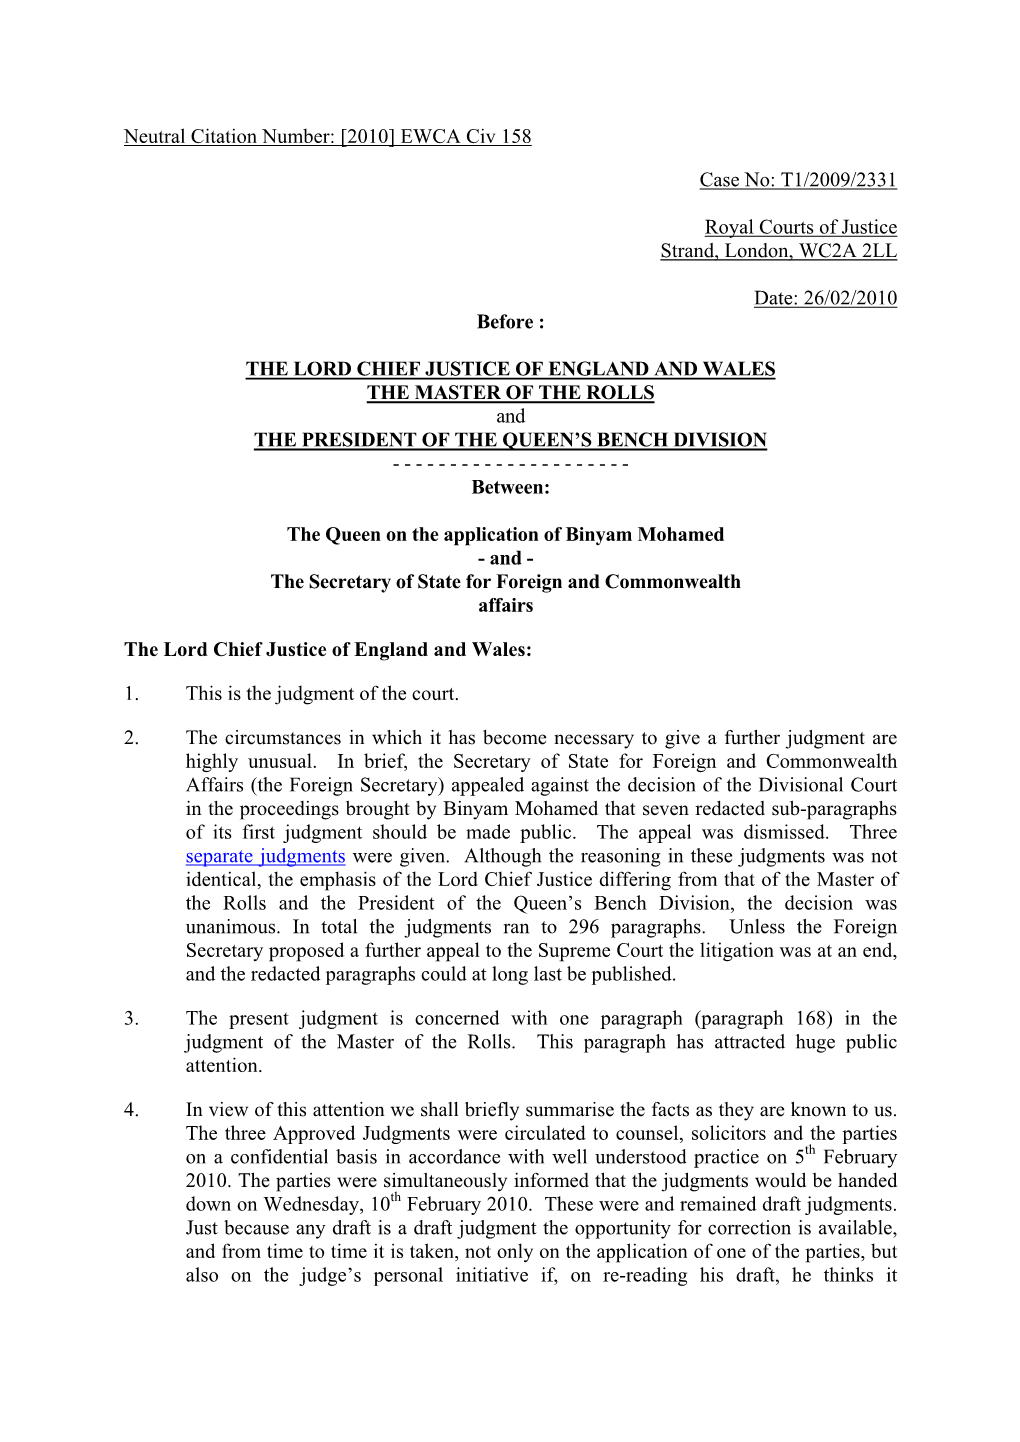 Court of Appeal Judgment: the Queen on the Application of Binyam